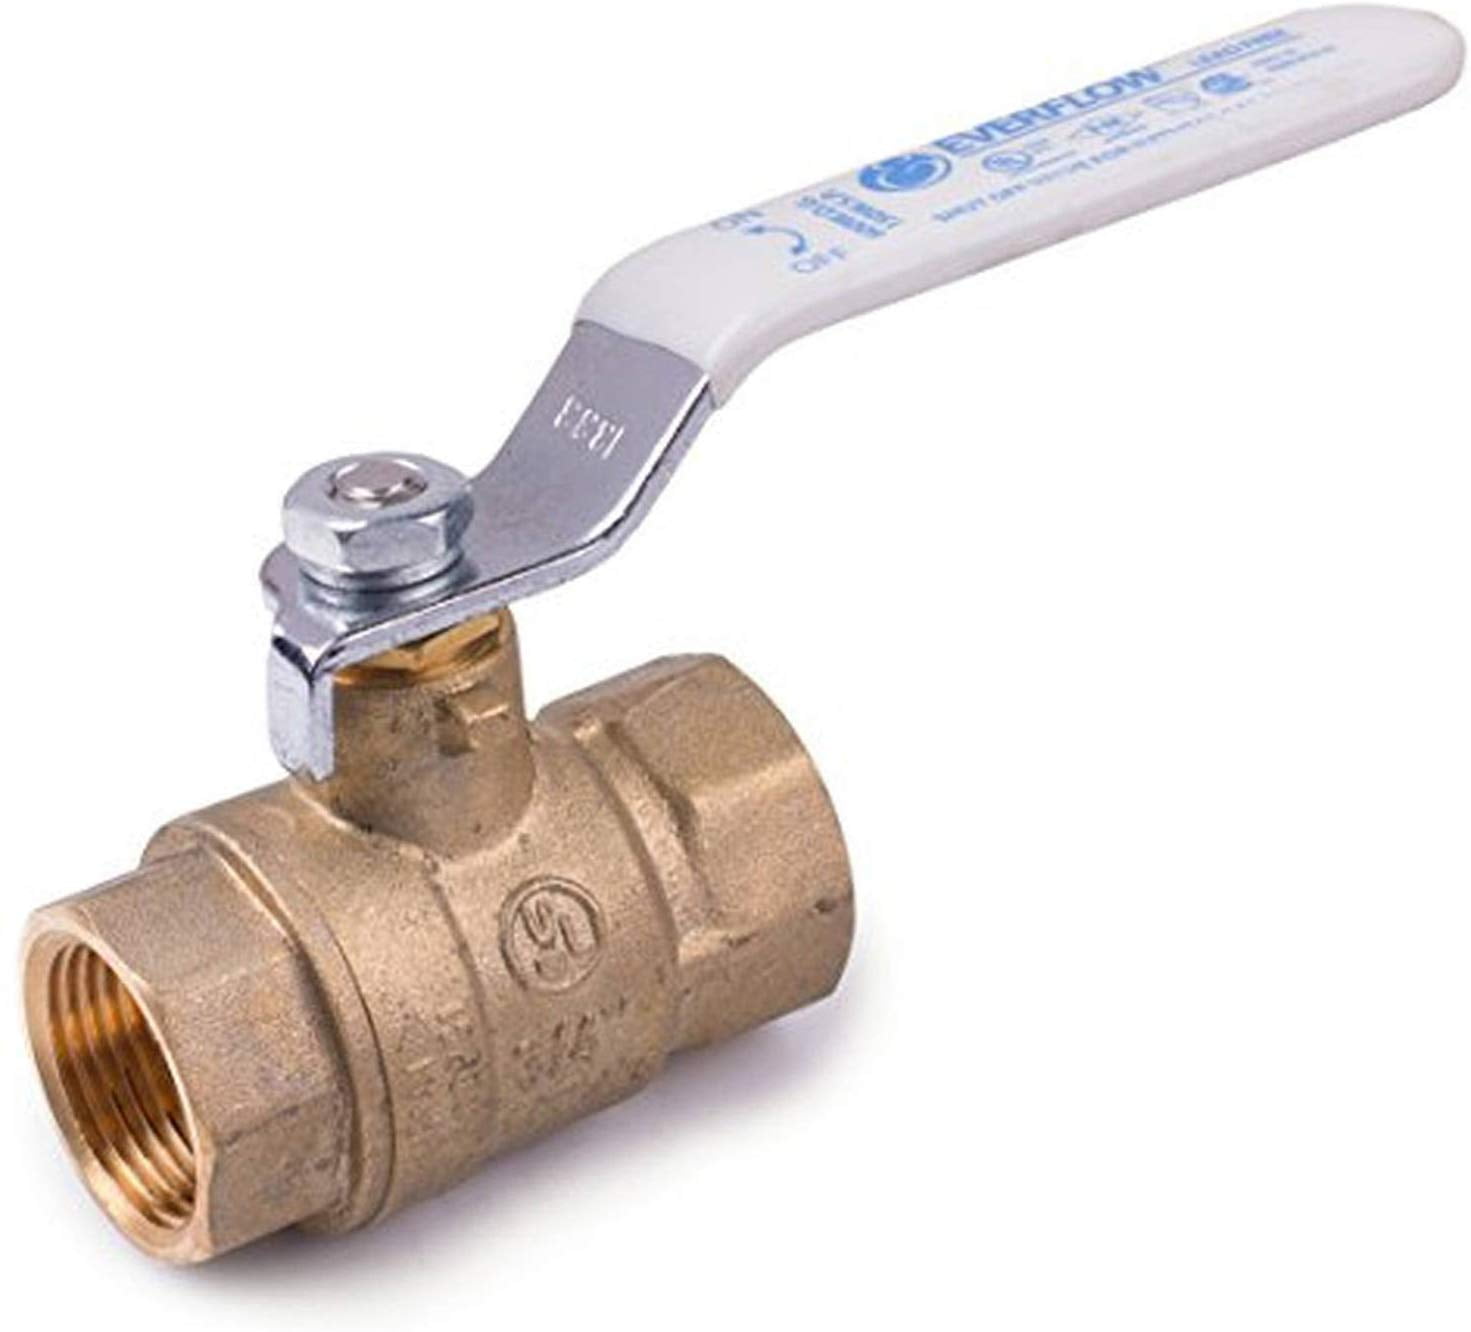 Midline Valve 75343 Premium Brass Ball Valve Long Bonnet with T-Handle with 1/2 in Sweat Connections